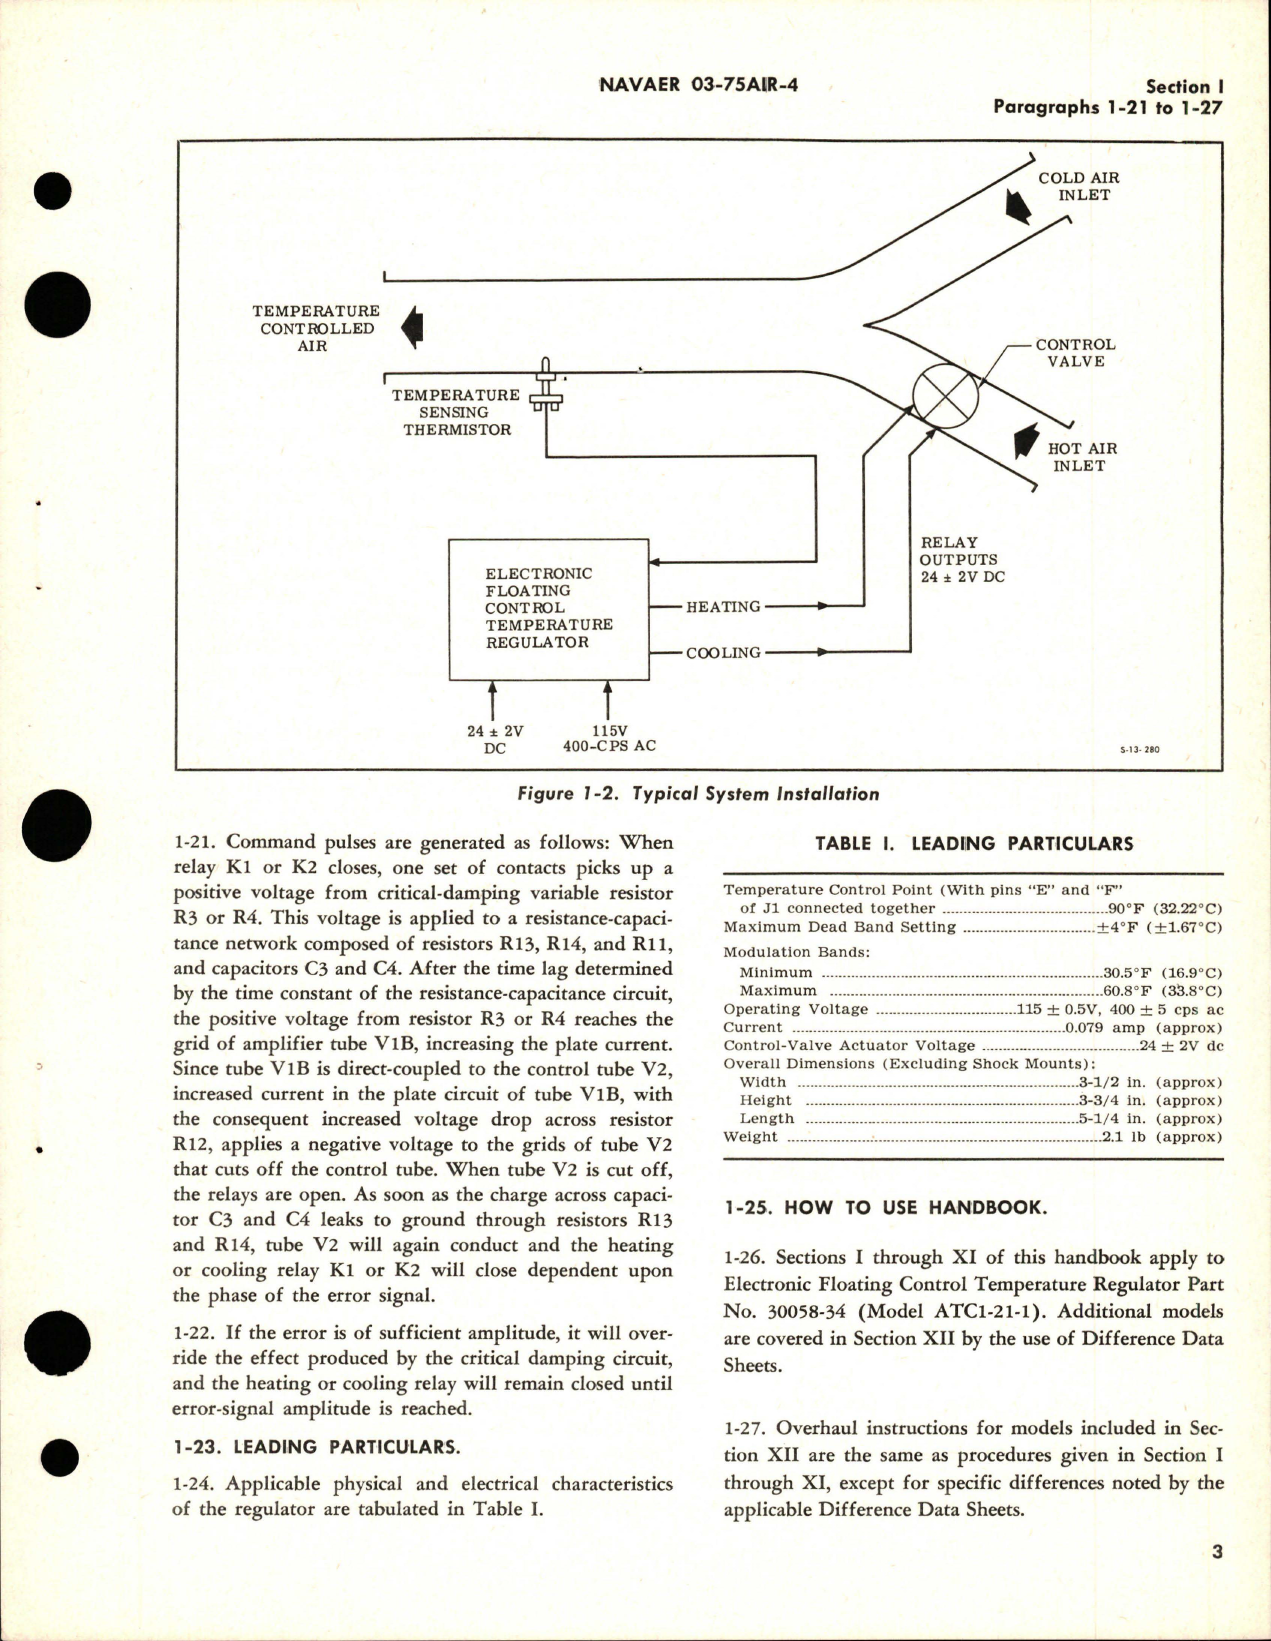 Sample page 7 from AirCorps Library document: Overhaul Instructions for Electronic Floating Control Temperature Regulator - Part 30058-34 - Model ACT1-21